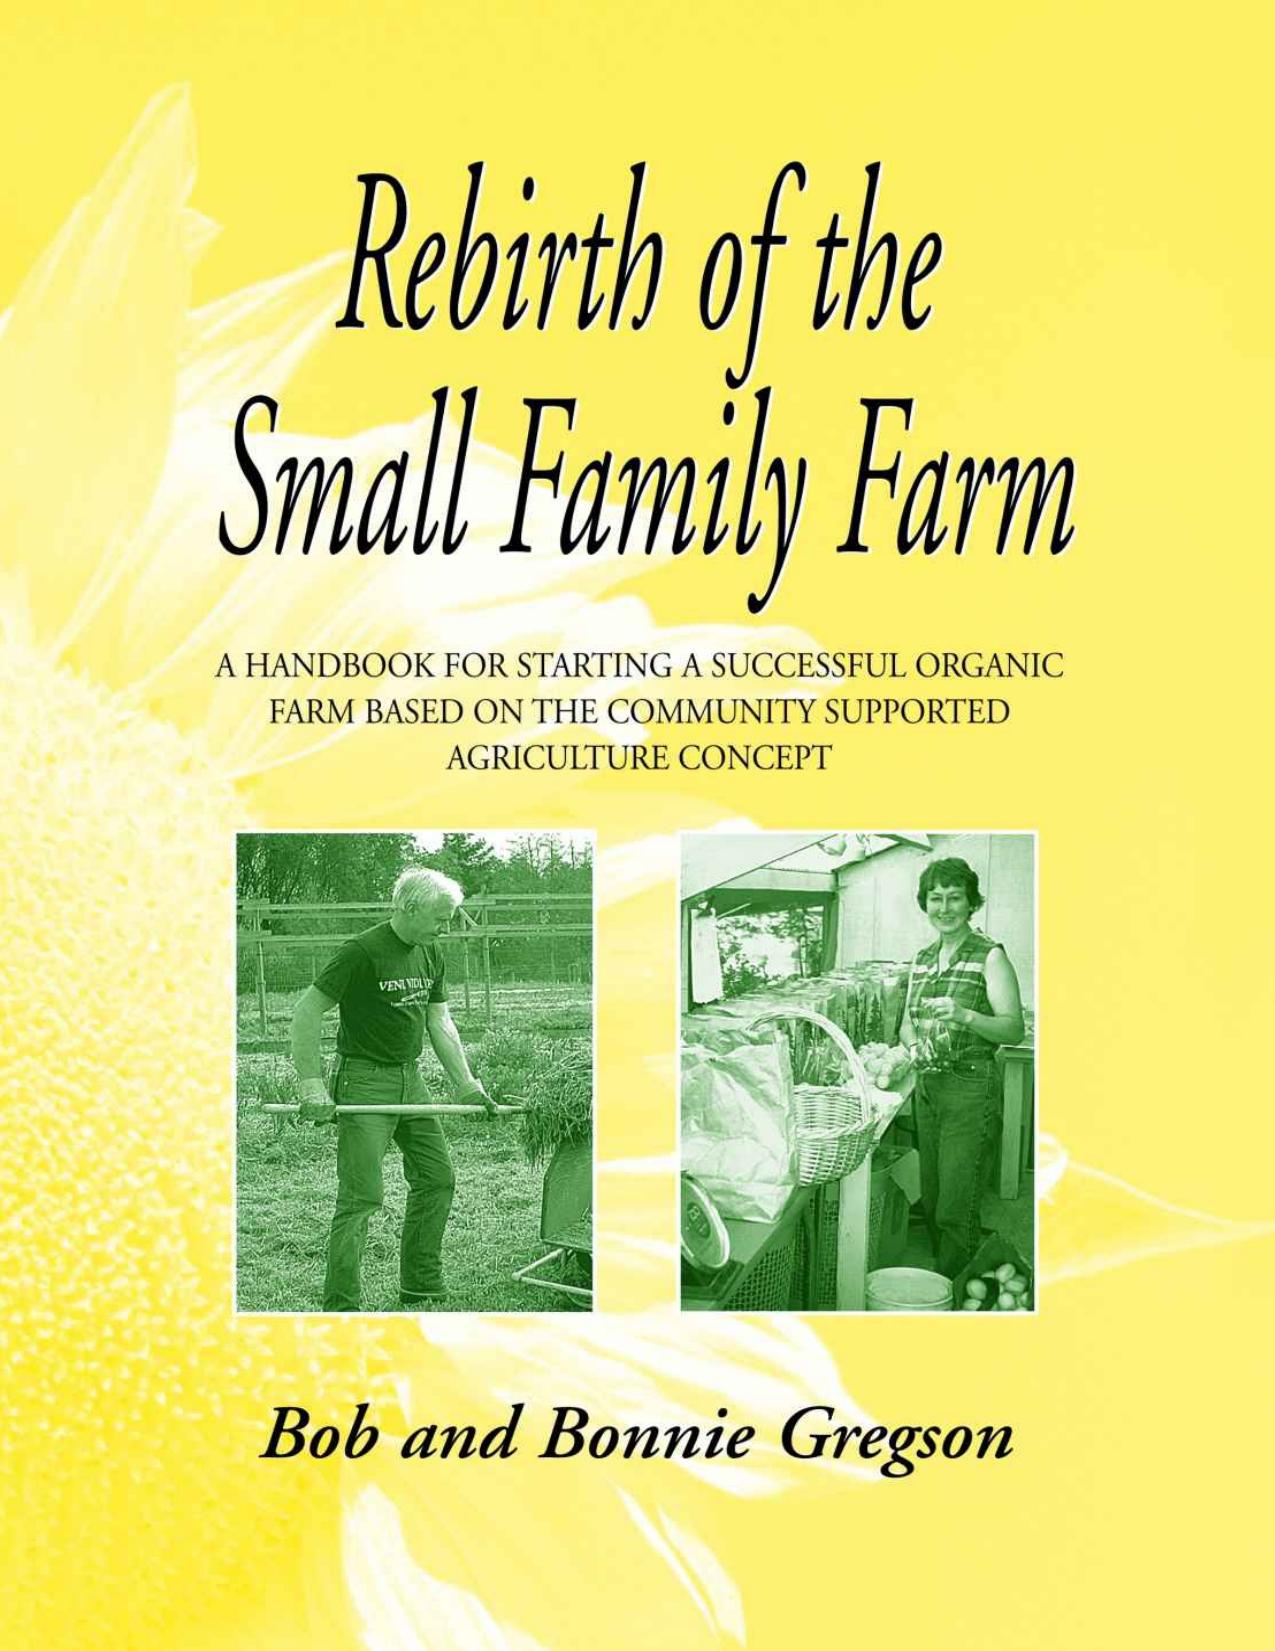 Rebirth of the Small Family Farm: A Handbook for Starting a Successful Organic Farm Based on the Community Supported Agriculture Concept